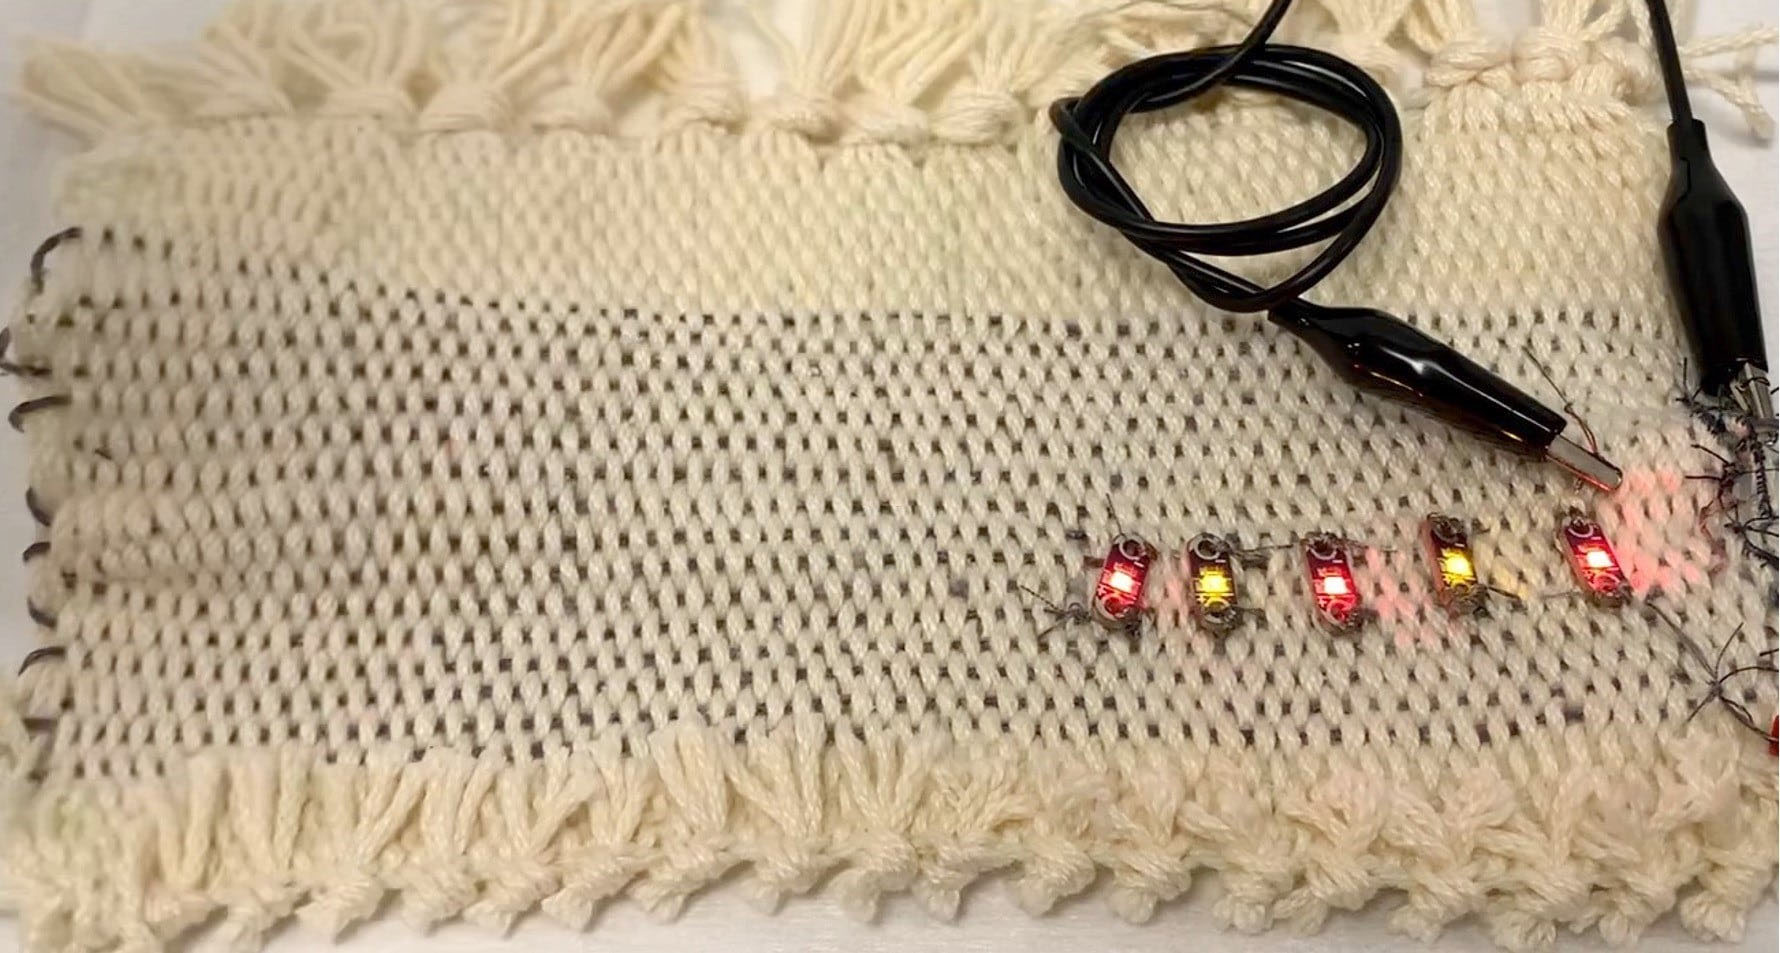 Supercapacitor yarns integrated in a fabric for powering LEDs